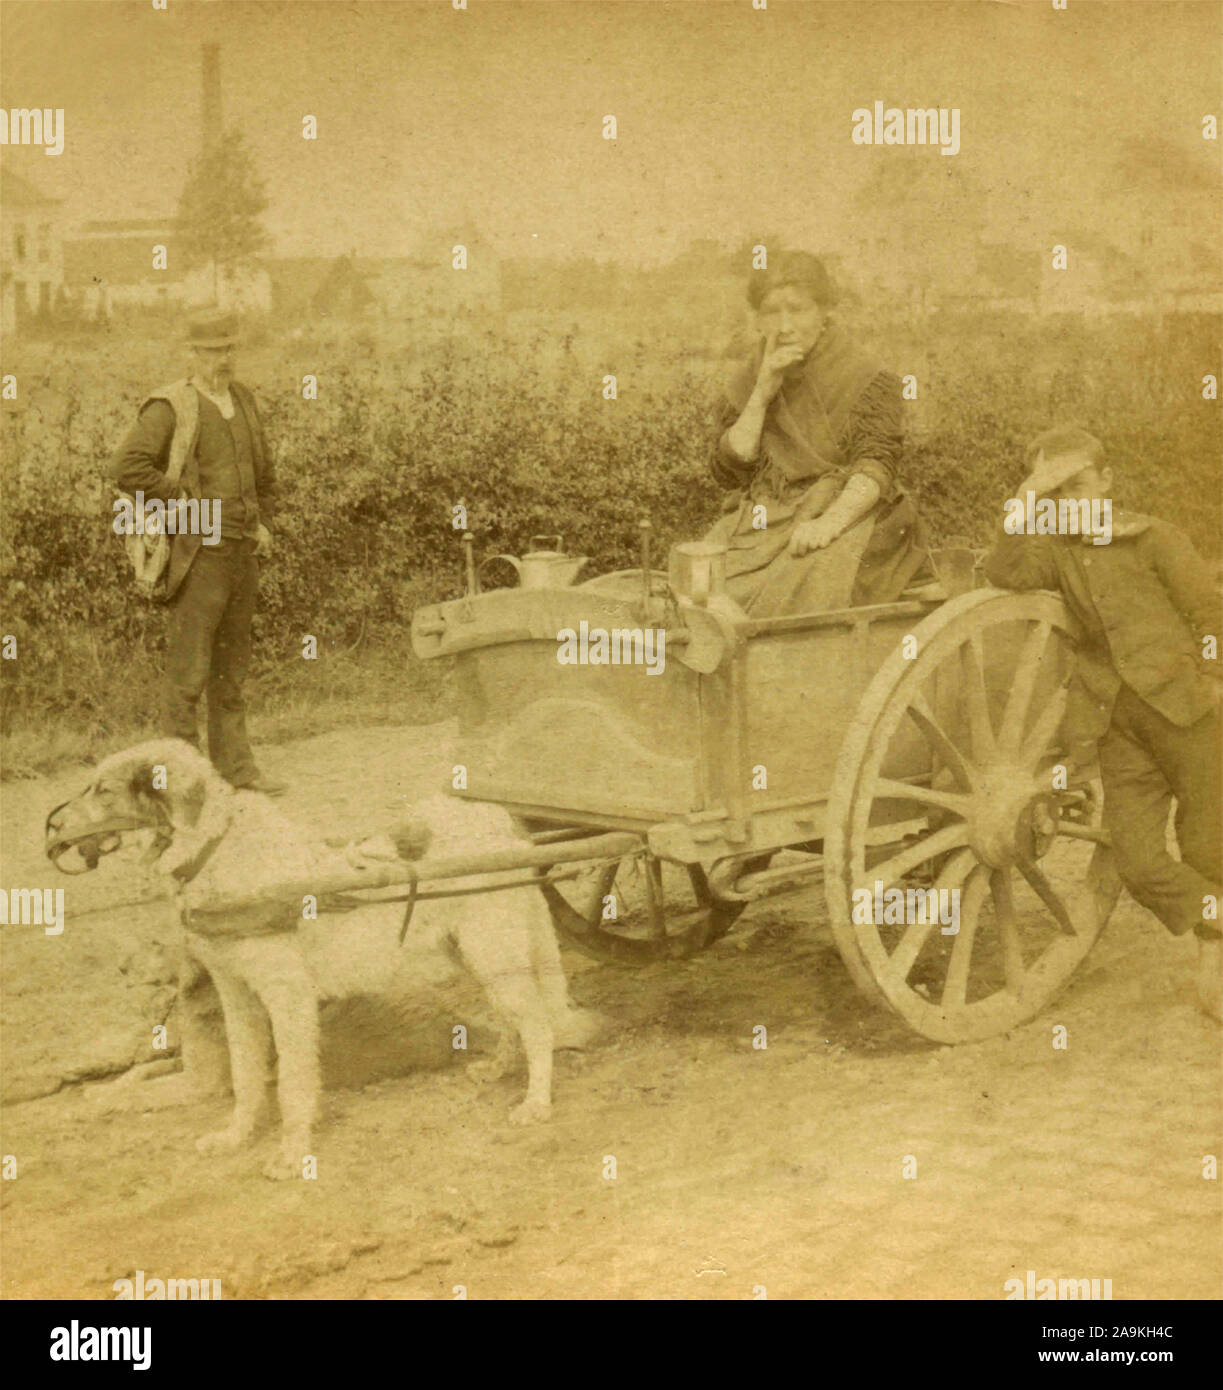 A woman carrying the milk in a cart pulled by a dog, Antwerp, Belgium Stock Photo